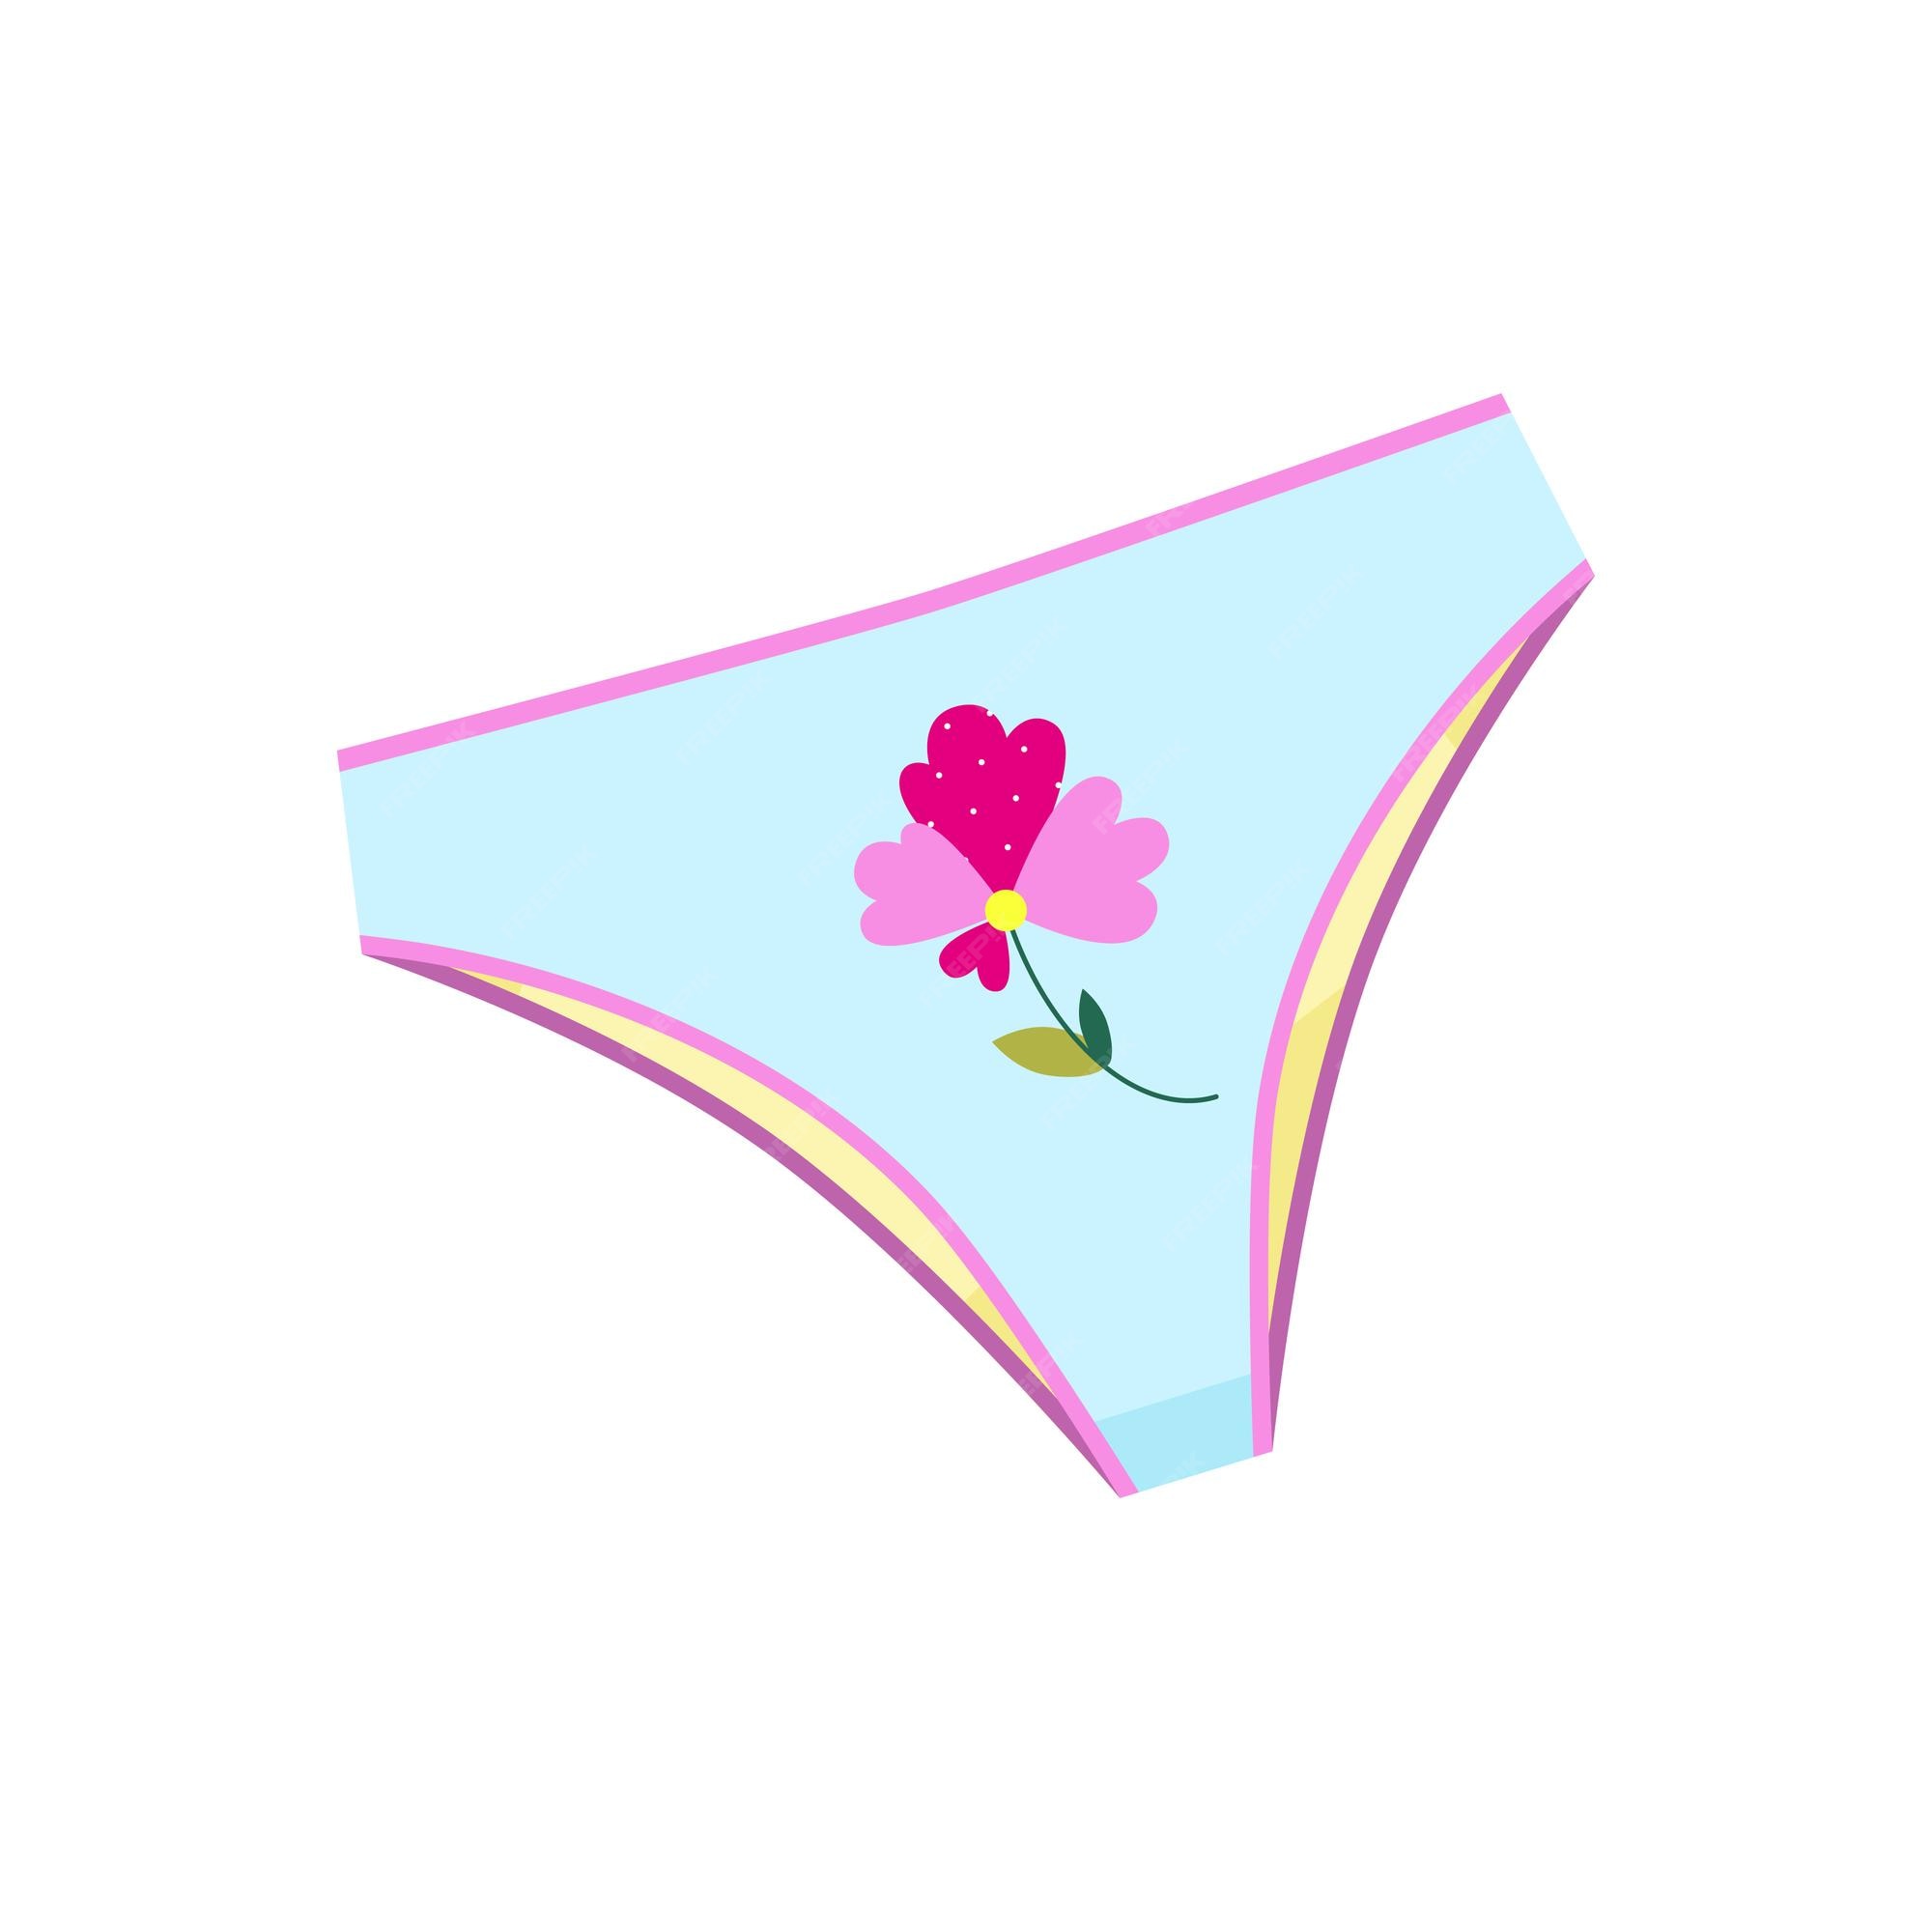 charles strauss recommends girls in cute thongs pic